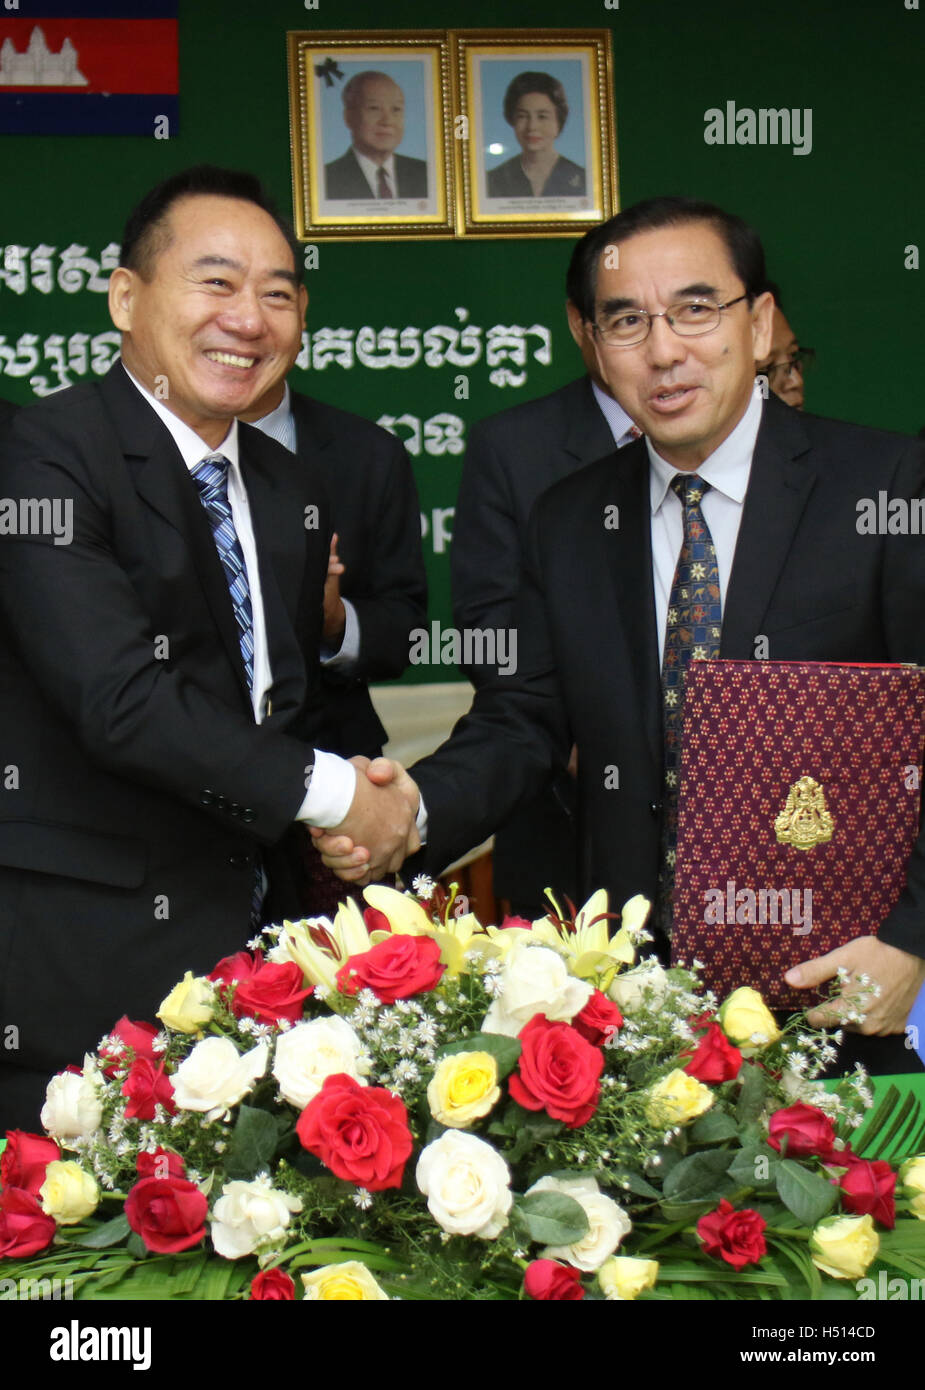 (161019) -- PHNOM PENH, Oct. 19, 2016 (Xinhua) -- Veng Sakhon (R), Cambodian Minister of Agriculture, Forestry and Fishery, shakes hands with Shen Chen (L), chairman of Tian Rui (Cambodia) Agricultural Cooperation Special Economic Zone, during a signing ceremony in Phnom Penh, Cambodia, Oct. 19, 2016. Cambodia signed a Memorandum of Understanding (MoU) on Agricultural Development with a Chinese company from east China's Shandong province on Wednesday. (Xinhua/Sovannara)(axy) Stock Photo